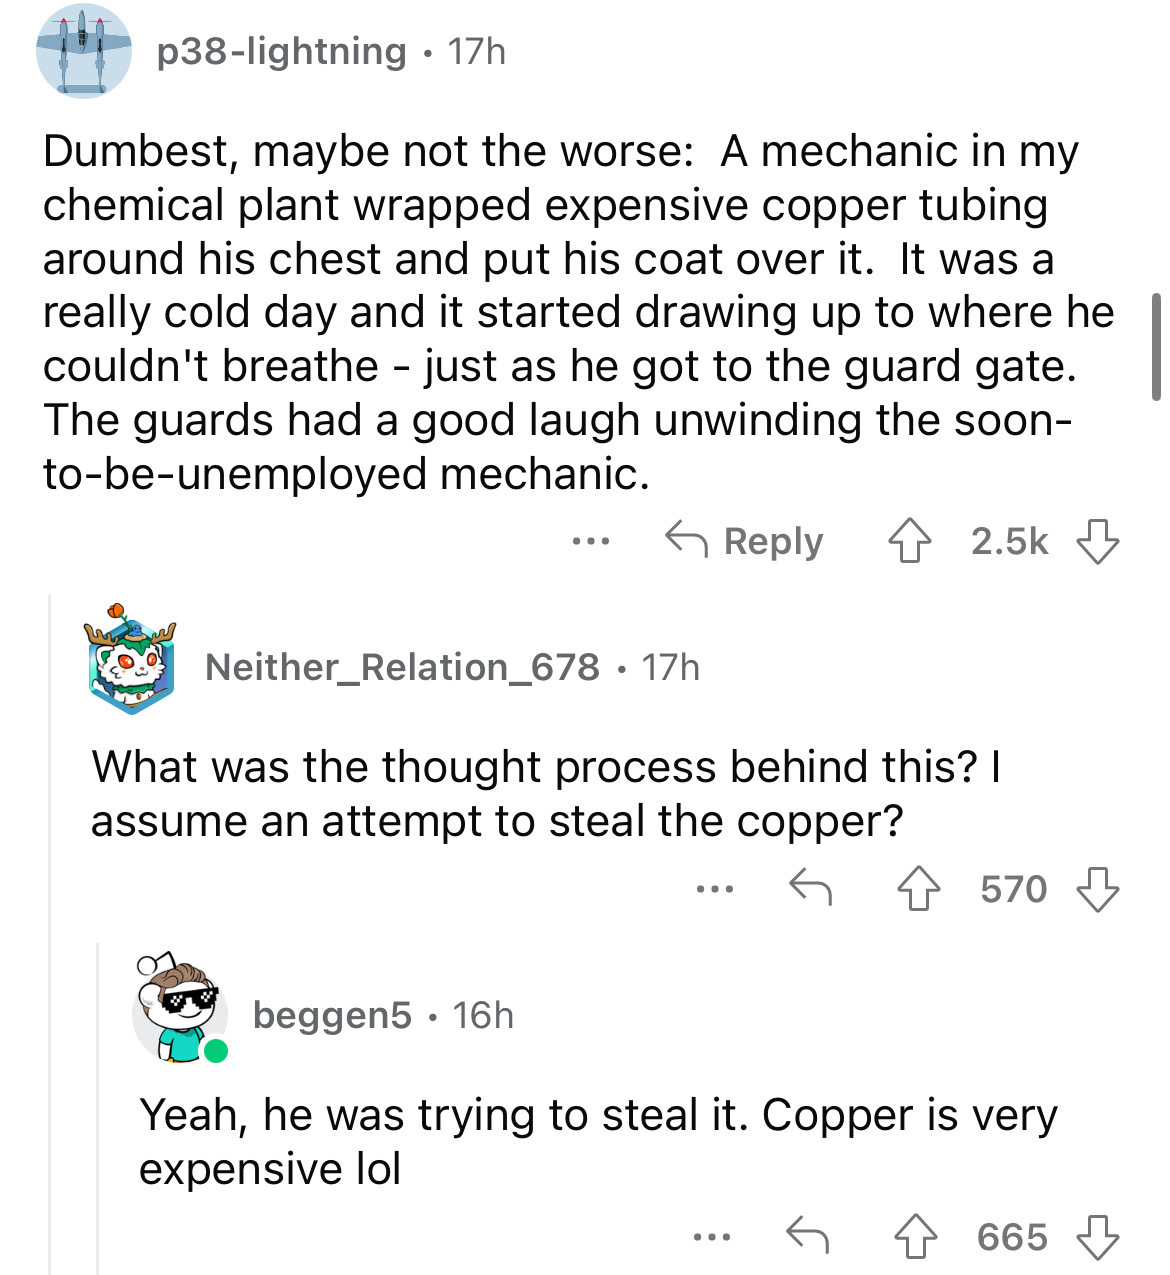 screenshot - p38lightning 17h Dumbest, maybe not the worse A mechanic in my chemical plant wrapped expensive copper tubing around his chest and put his coat over it. It was a really cold day and it started drawing up to where he couldn't breathe just as h